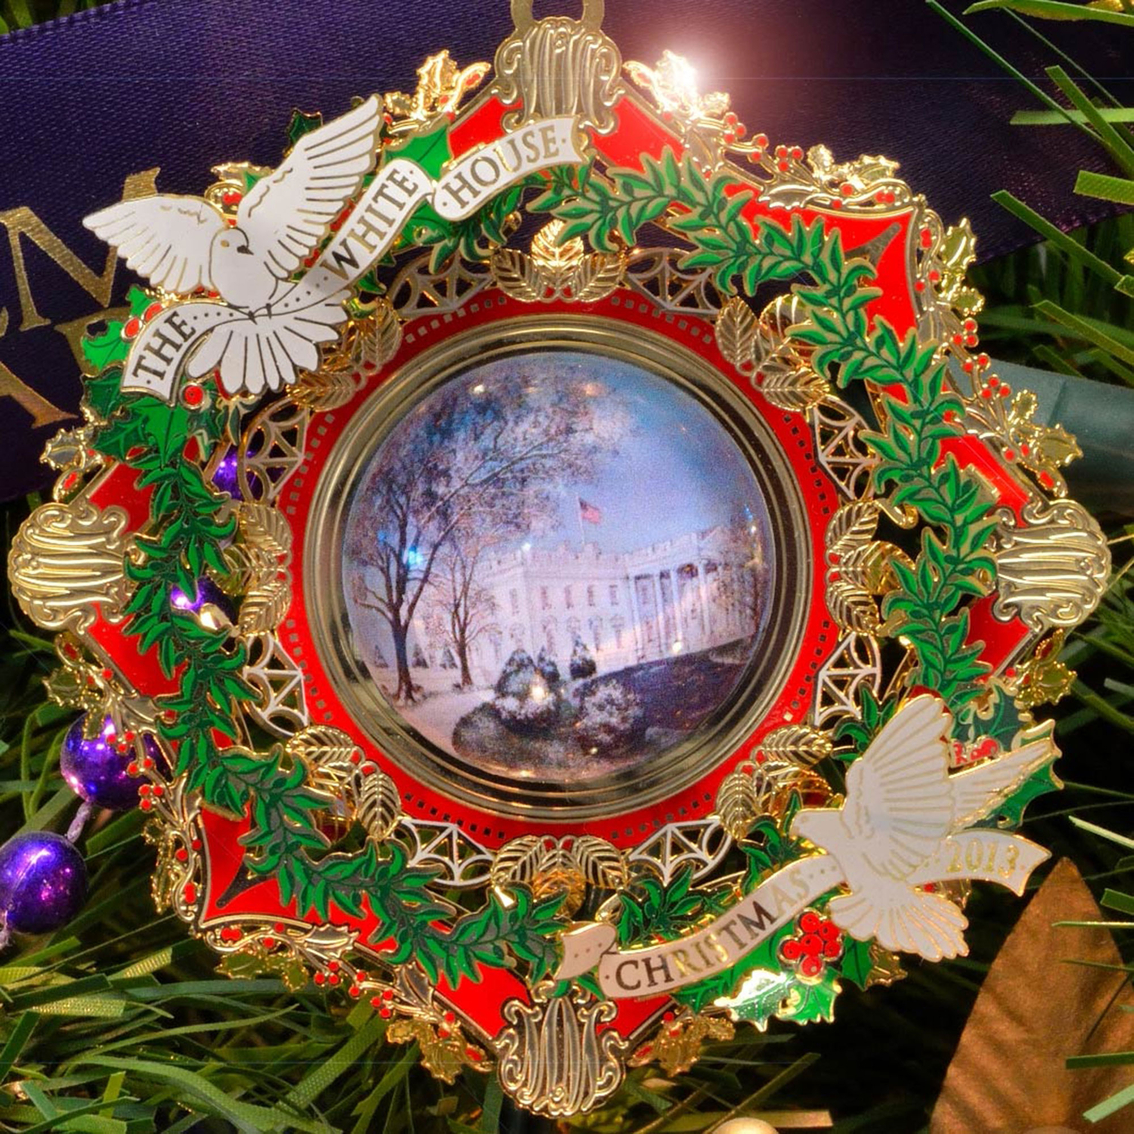 ChemArt 2013 White House Christmas Ornament - Image 2 of 2